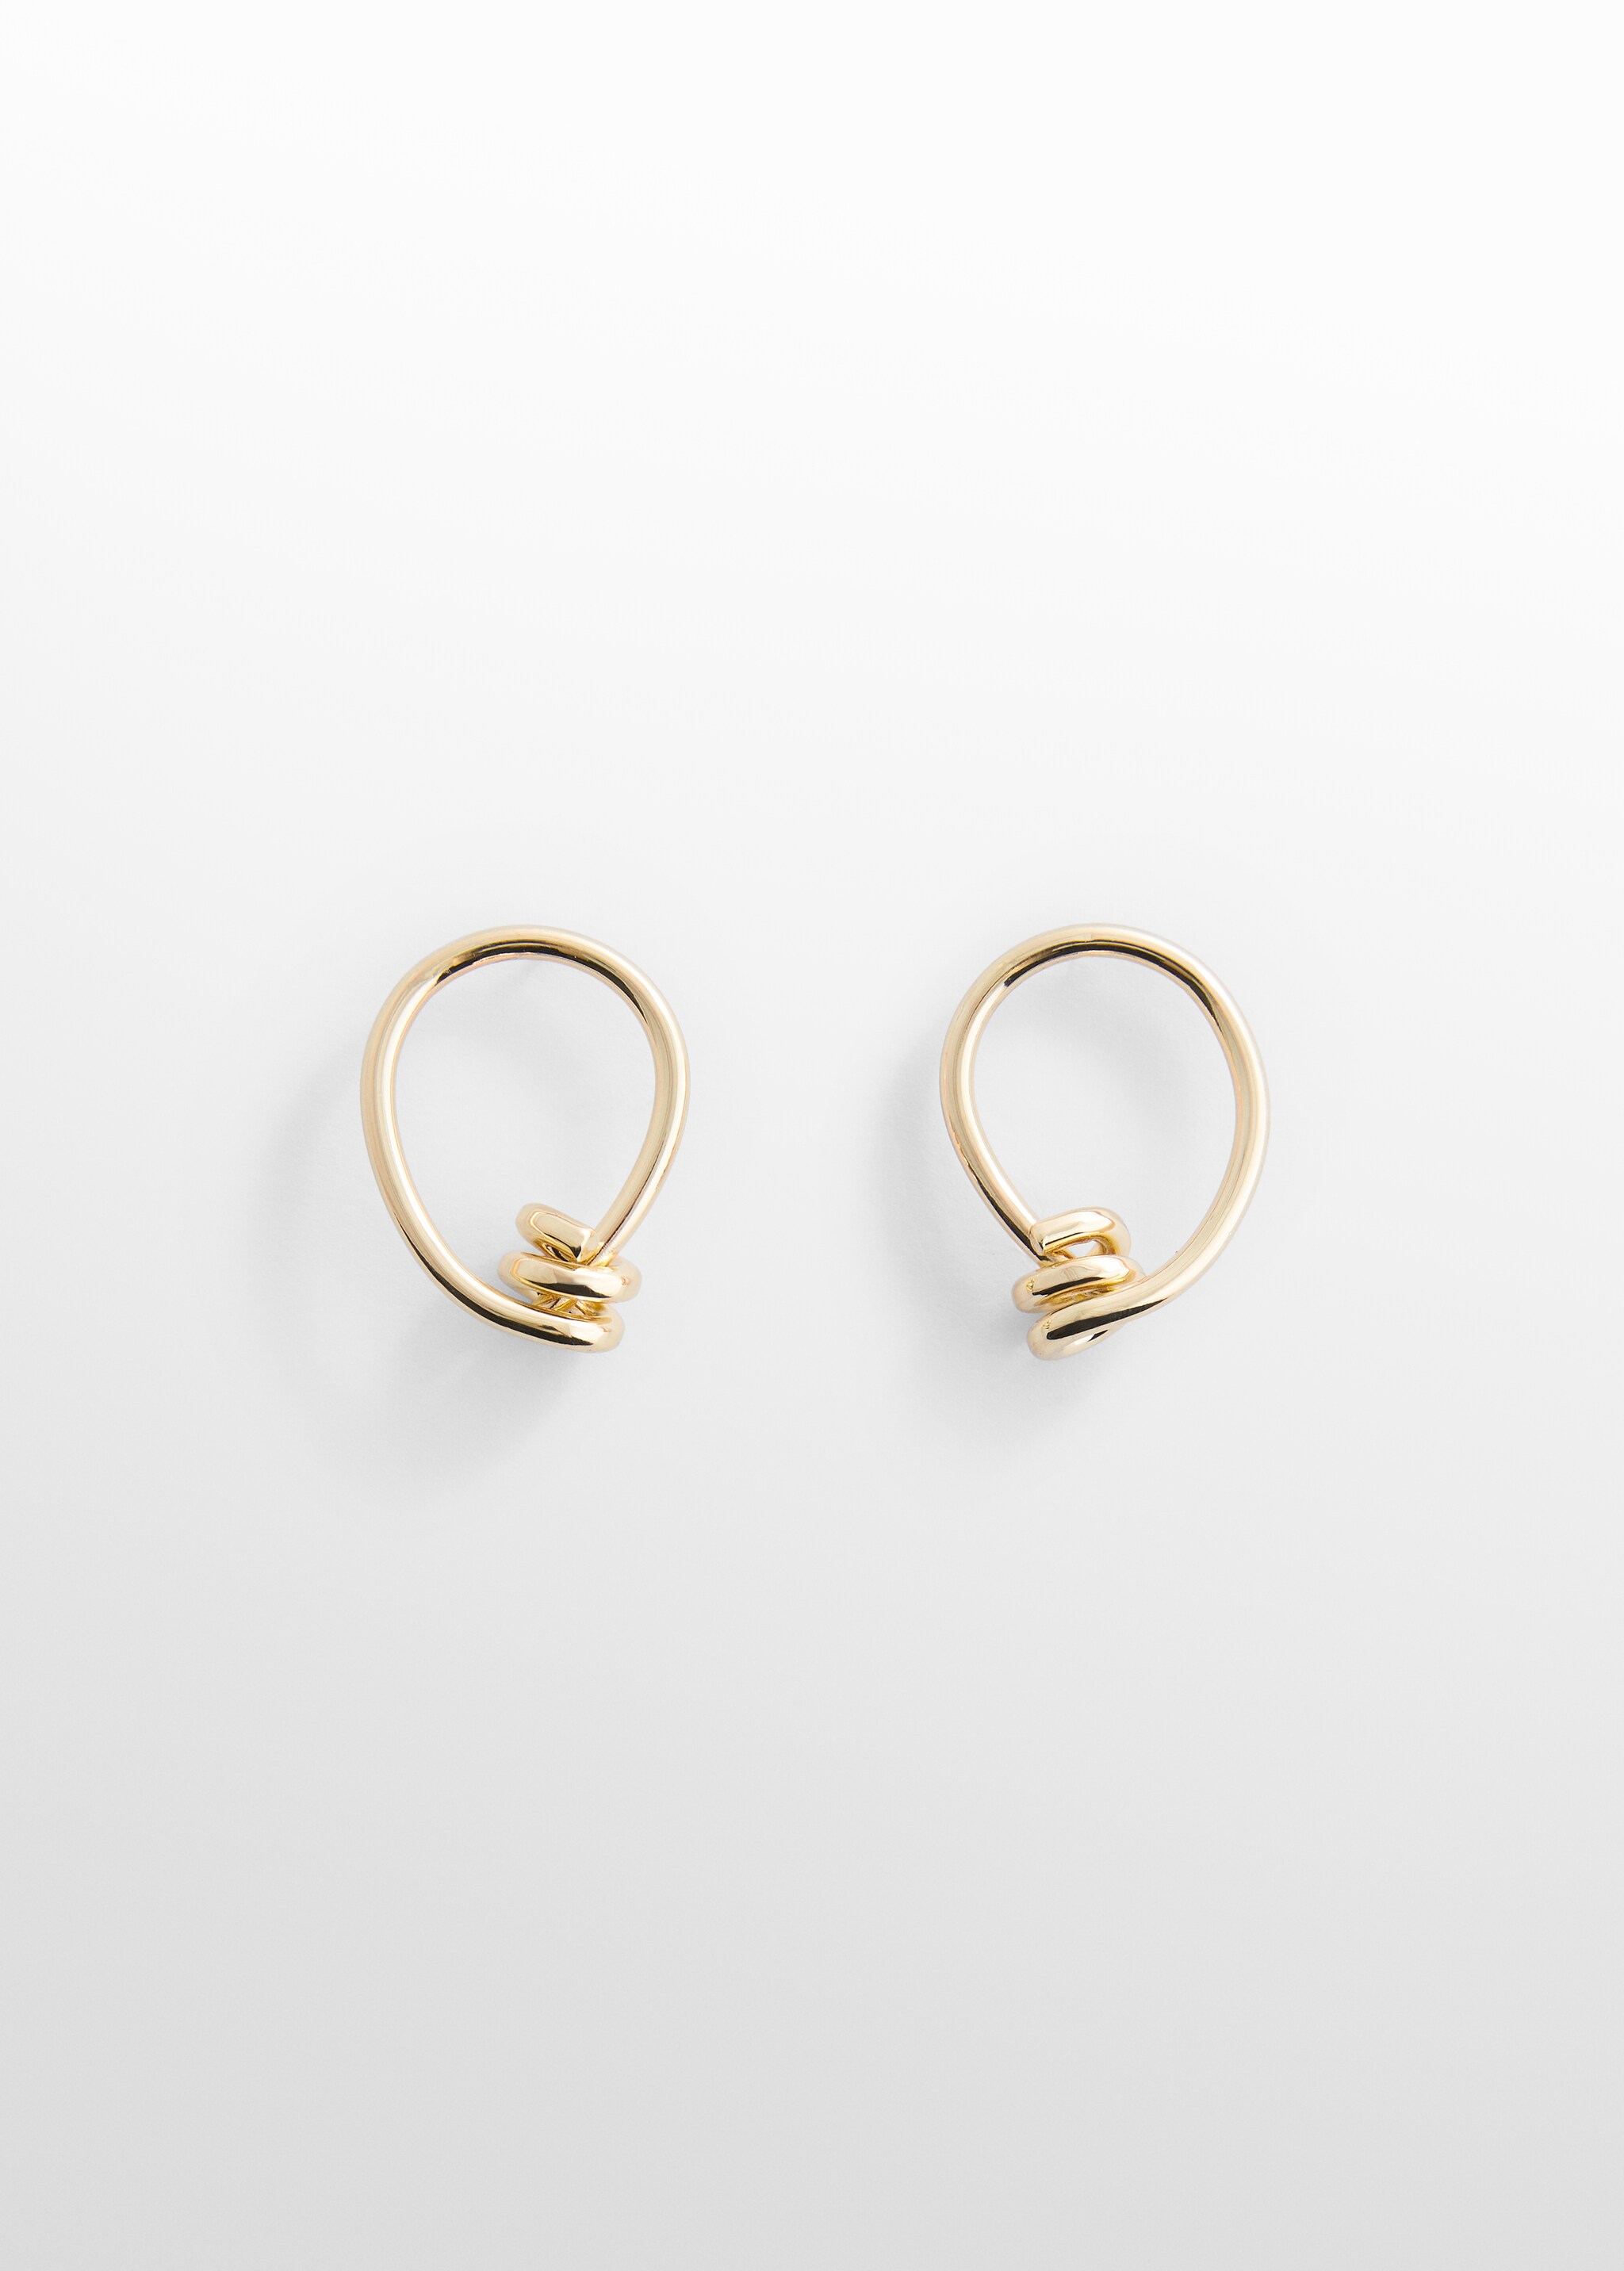 Earrings hoop knot - Article without model